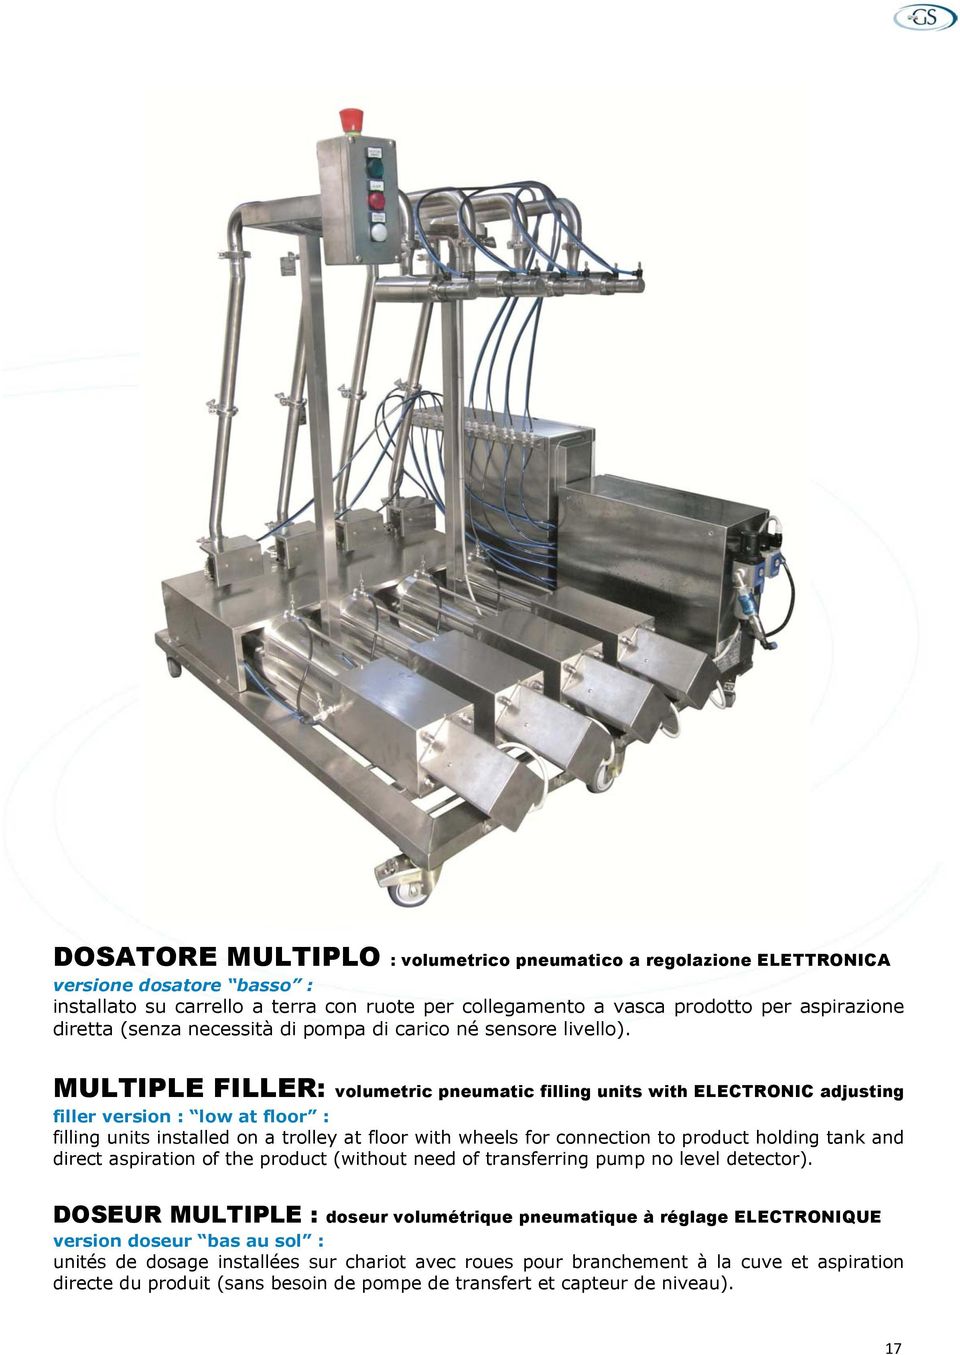 MULTIPLE FILLER: volumetric pneumatic filling units with ELECTRONIC adjusting filler version : low at floor : filling units installed on a trolley at floor with wheels for connection to product